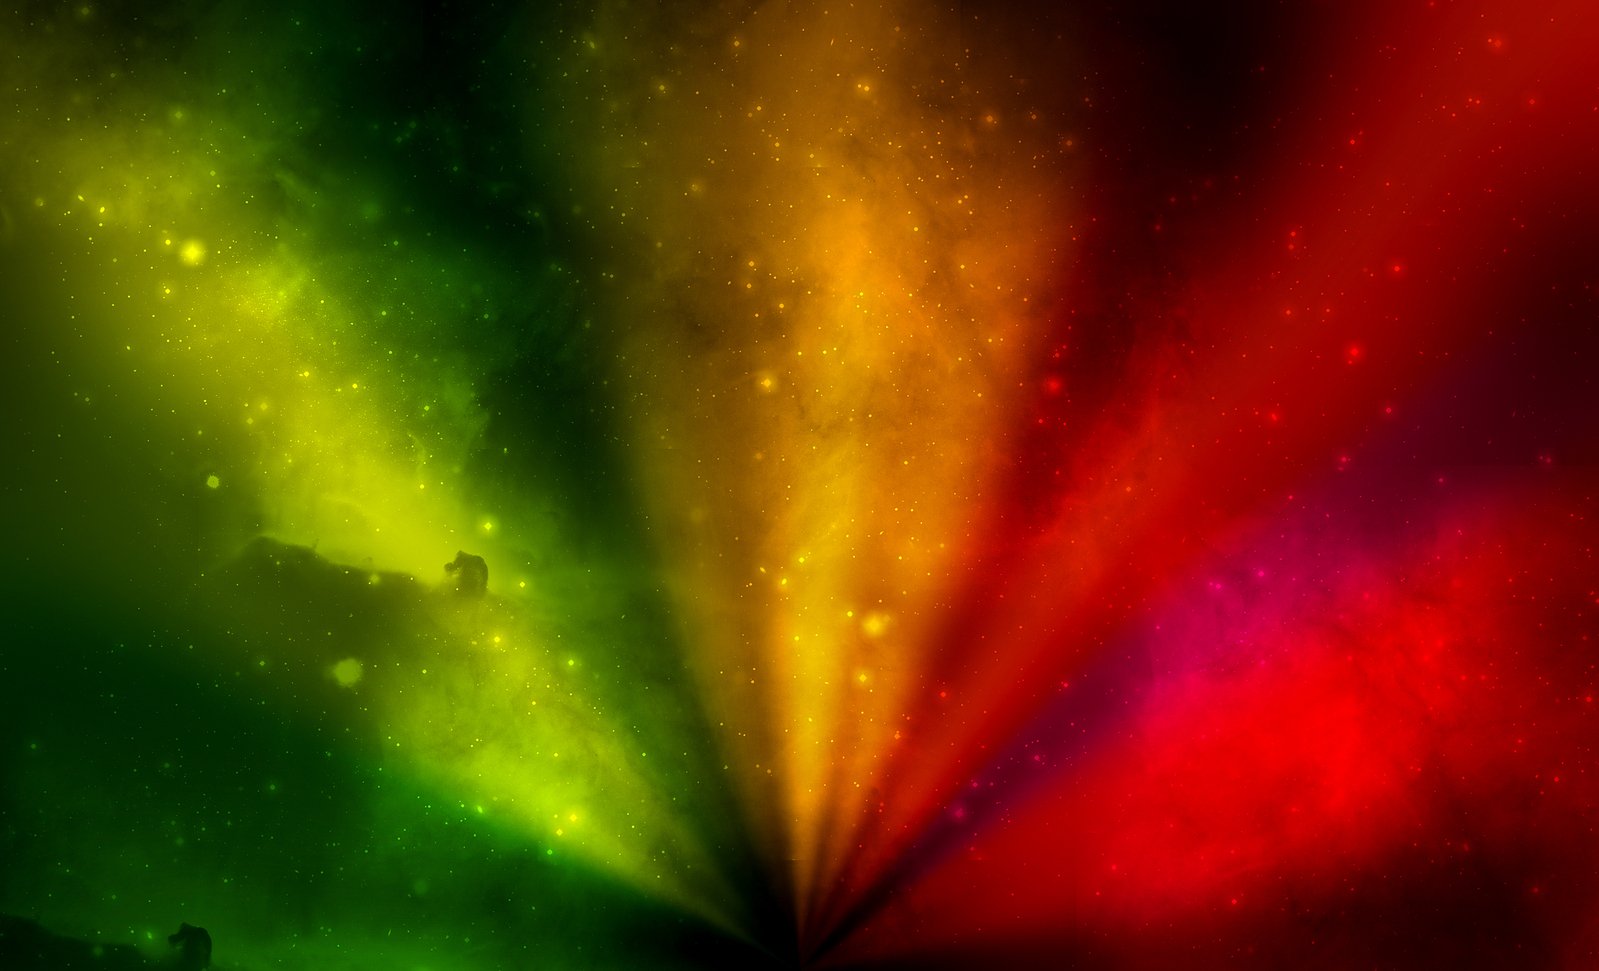 the colors of an abstract rainbow is seen in the center of this image